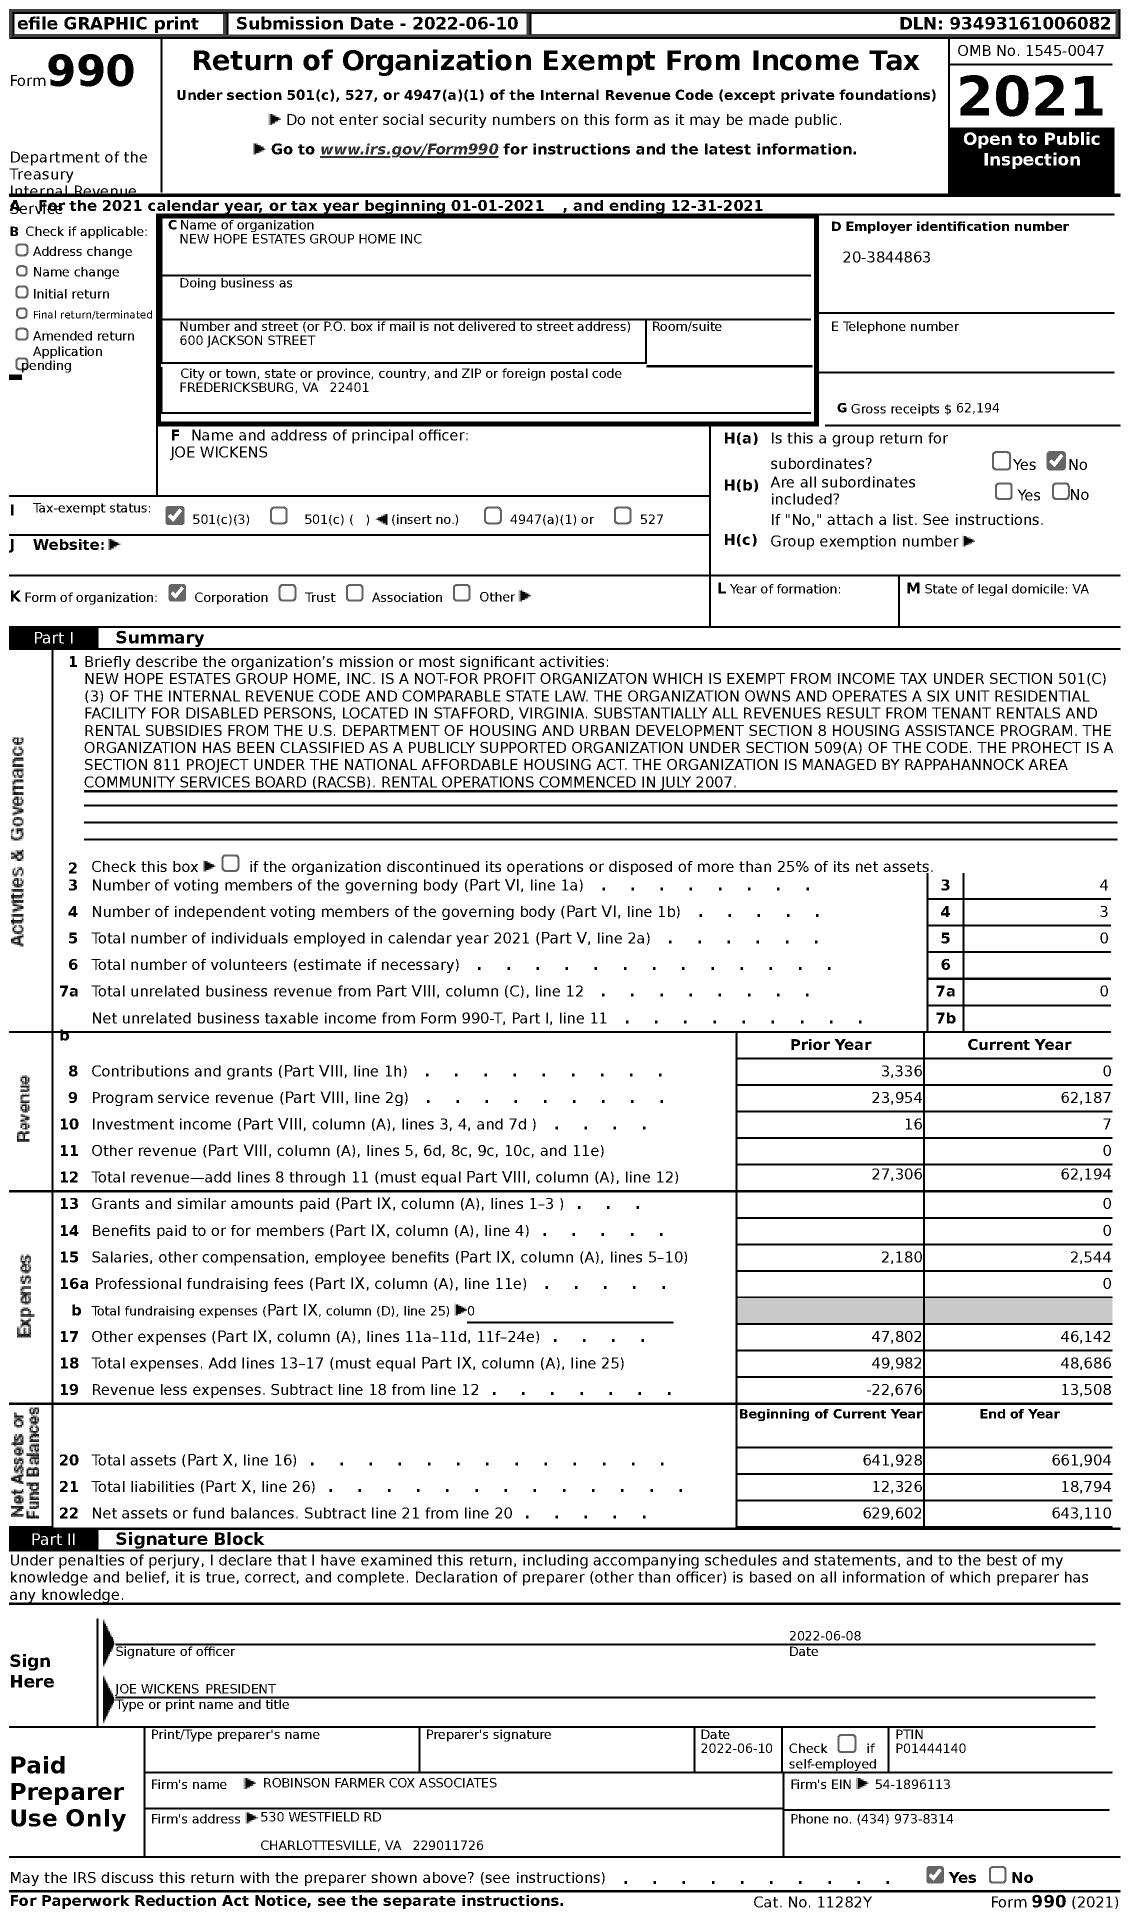 Image of first page of 2021 Form 990 for New Hope Estates Group Home